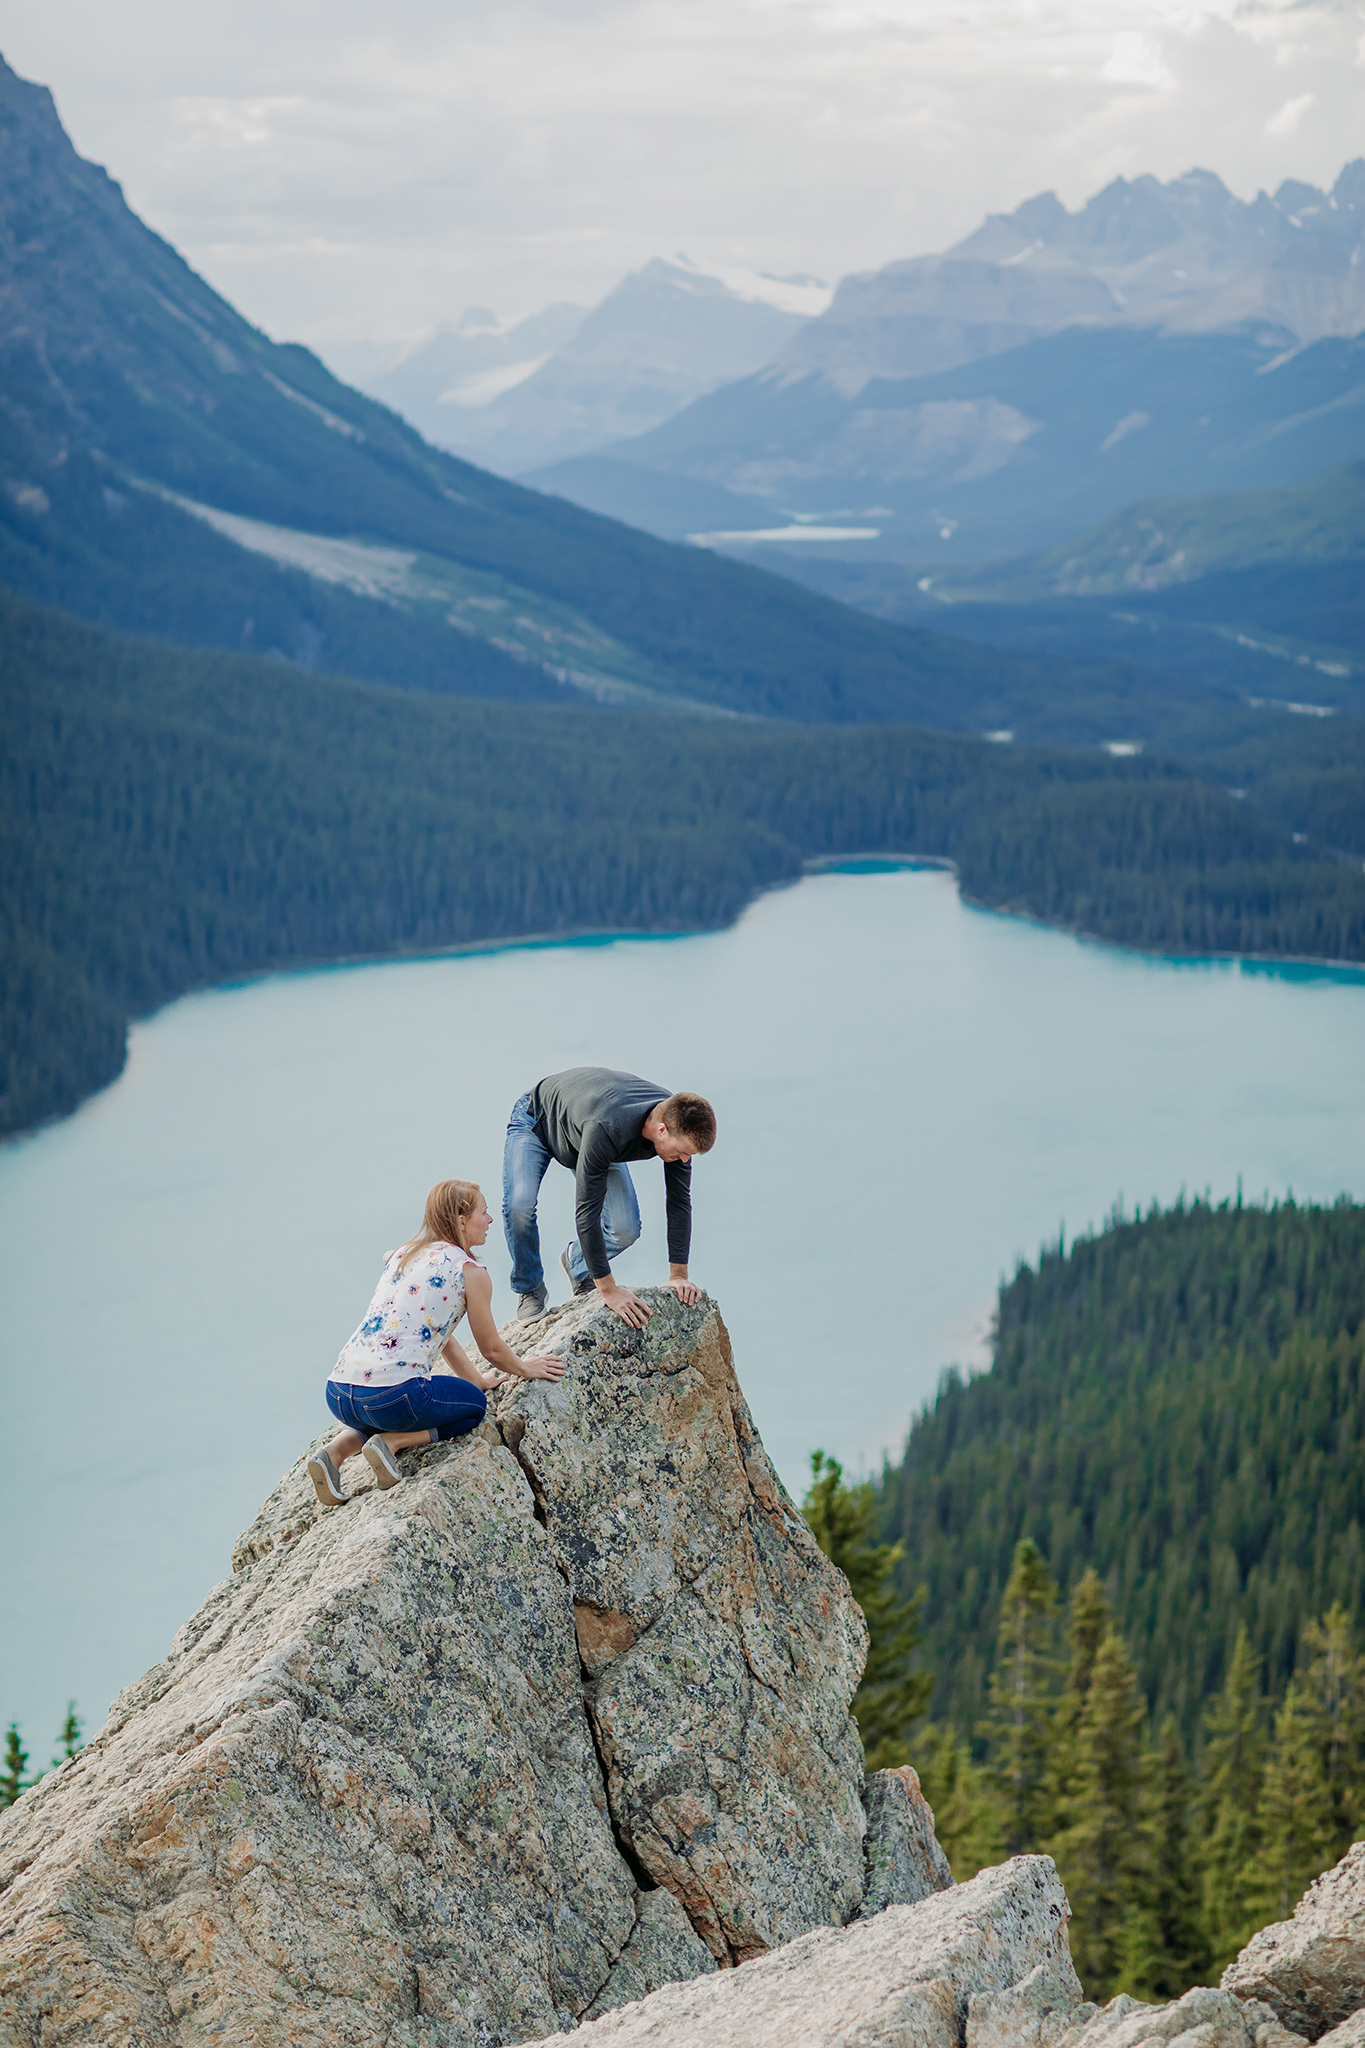 Adventurous Peyto Lake casual engagement photography session at Bow Summit along Icefields Parkway in Banff National Park photographed by local engagement & elopement photographer ENV Photography